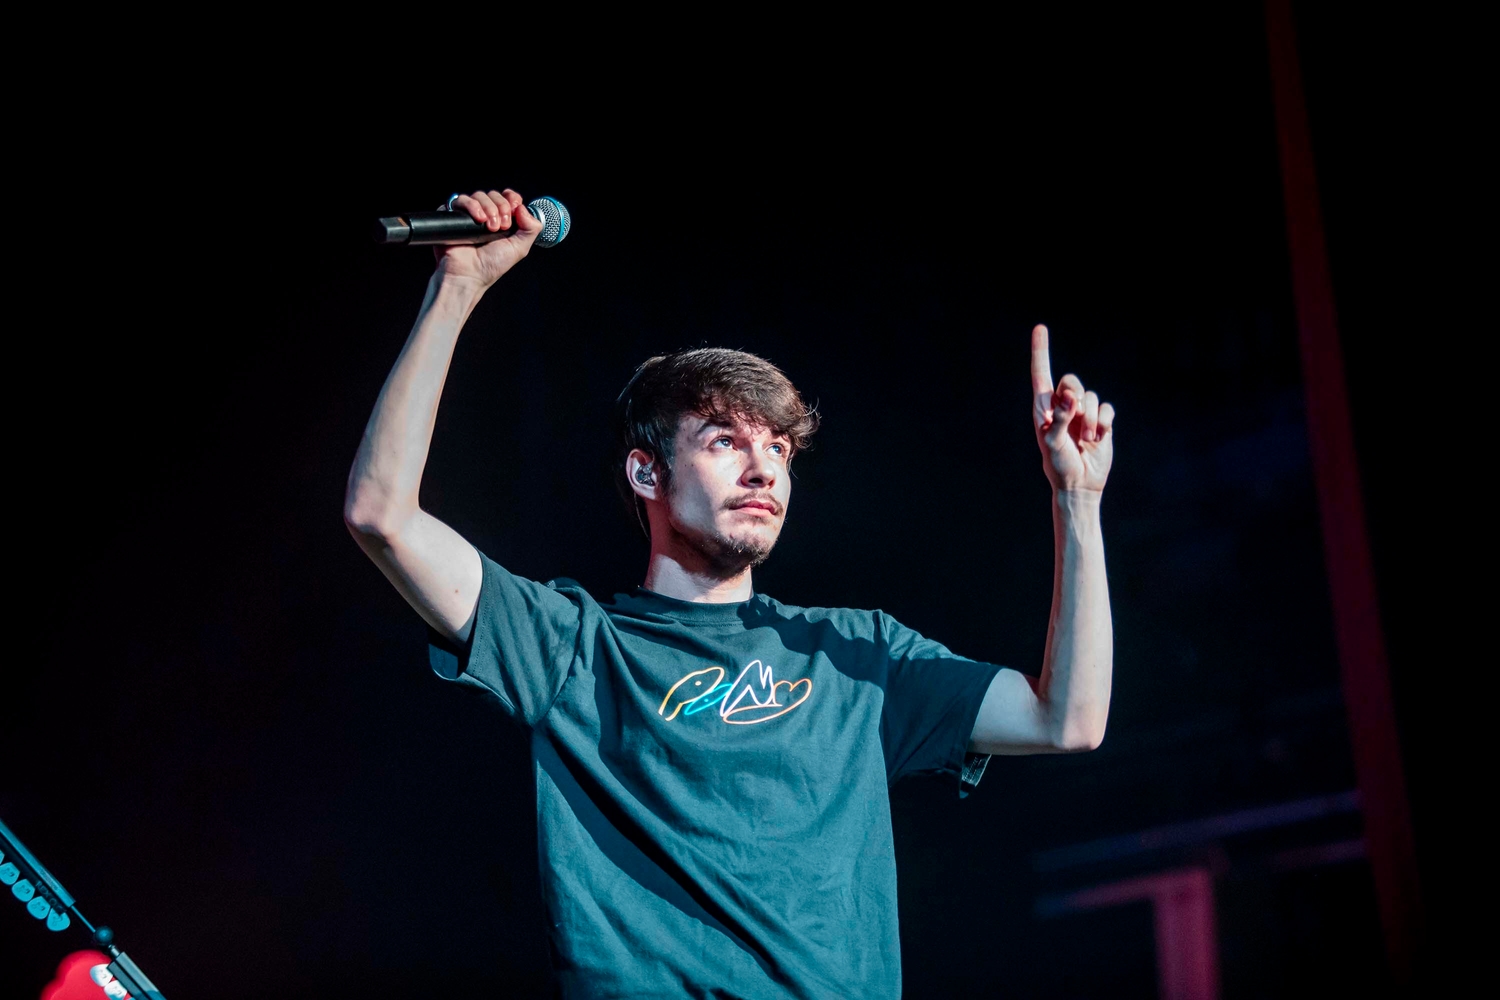 Rex Orange County, Foals, Shame and more confirmed for Lowlands Festival